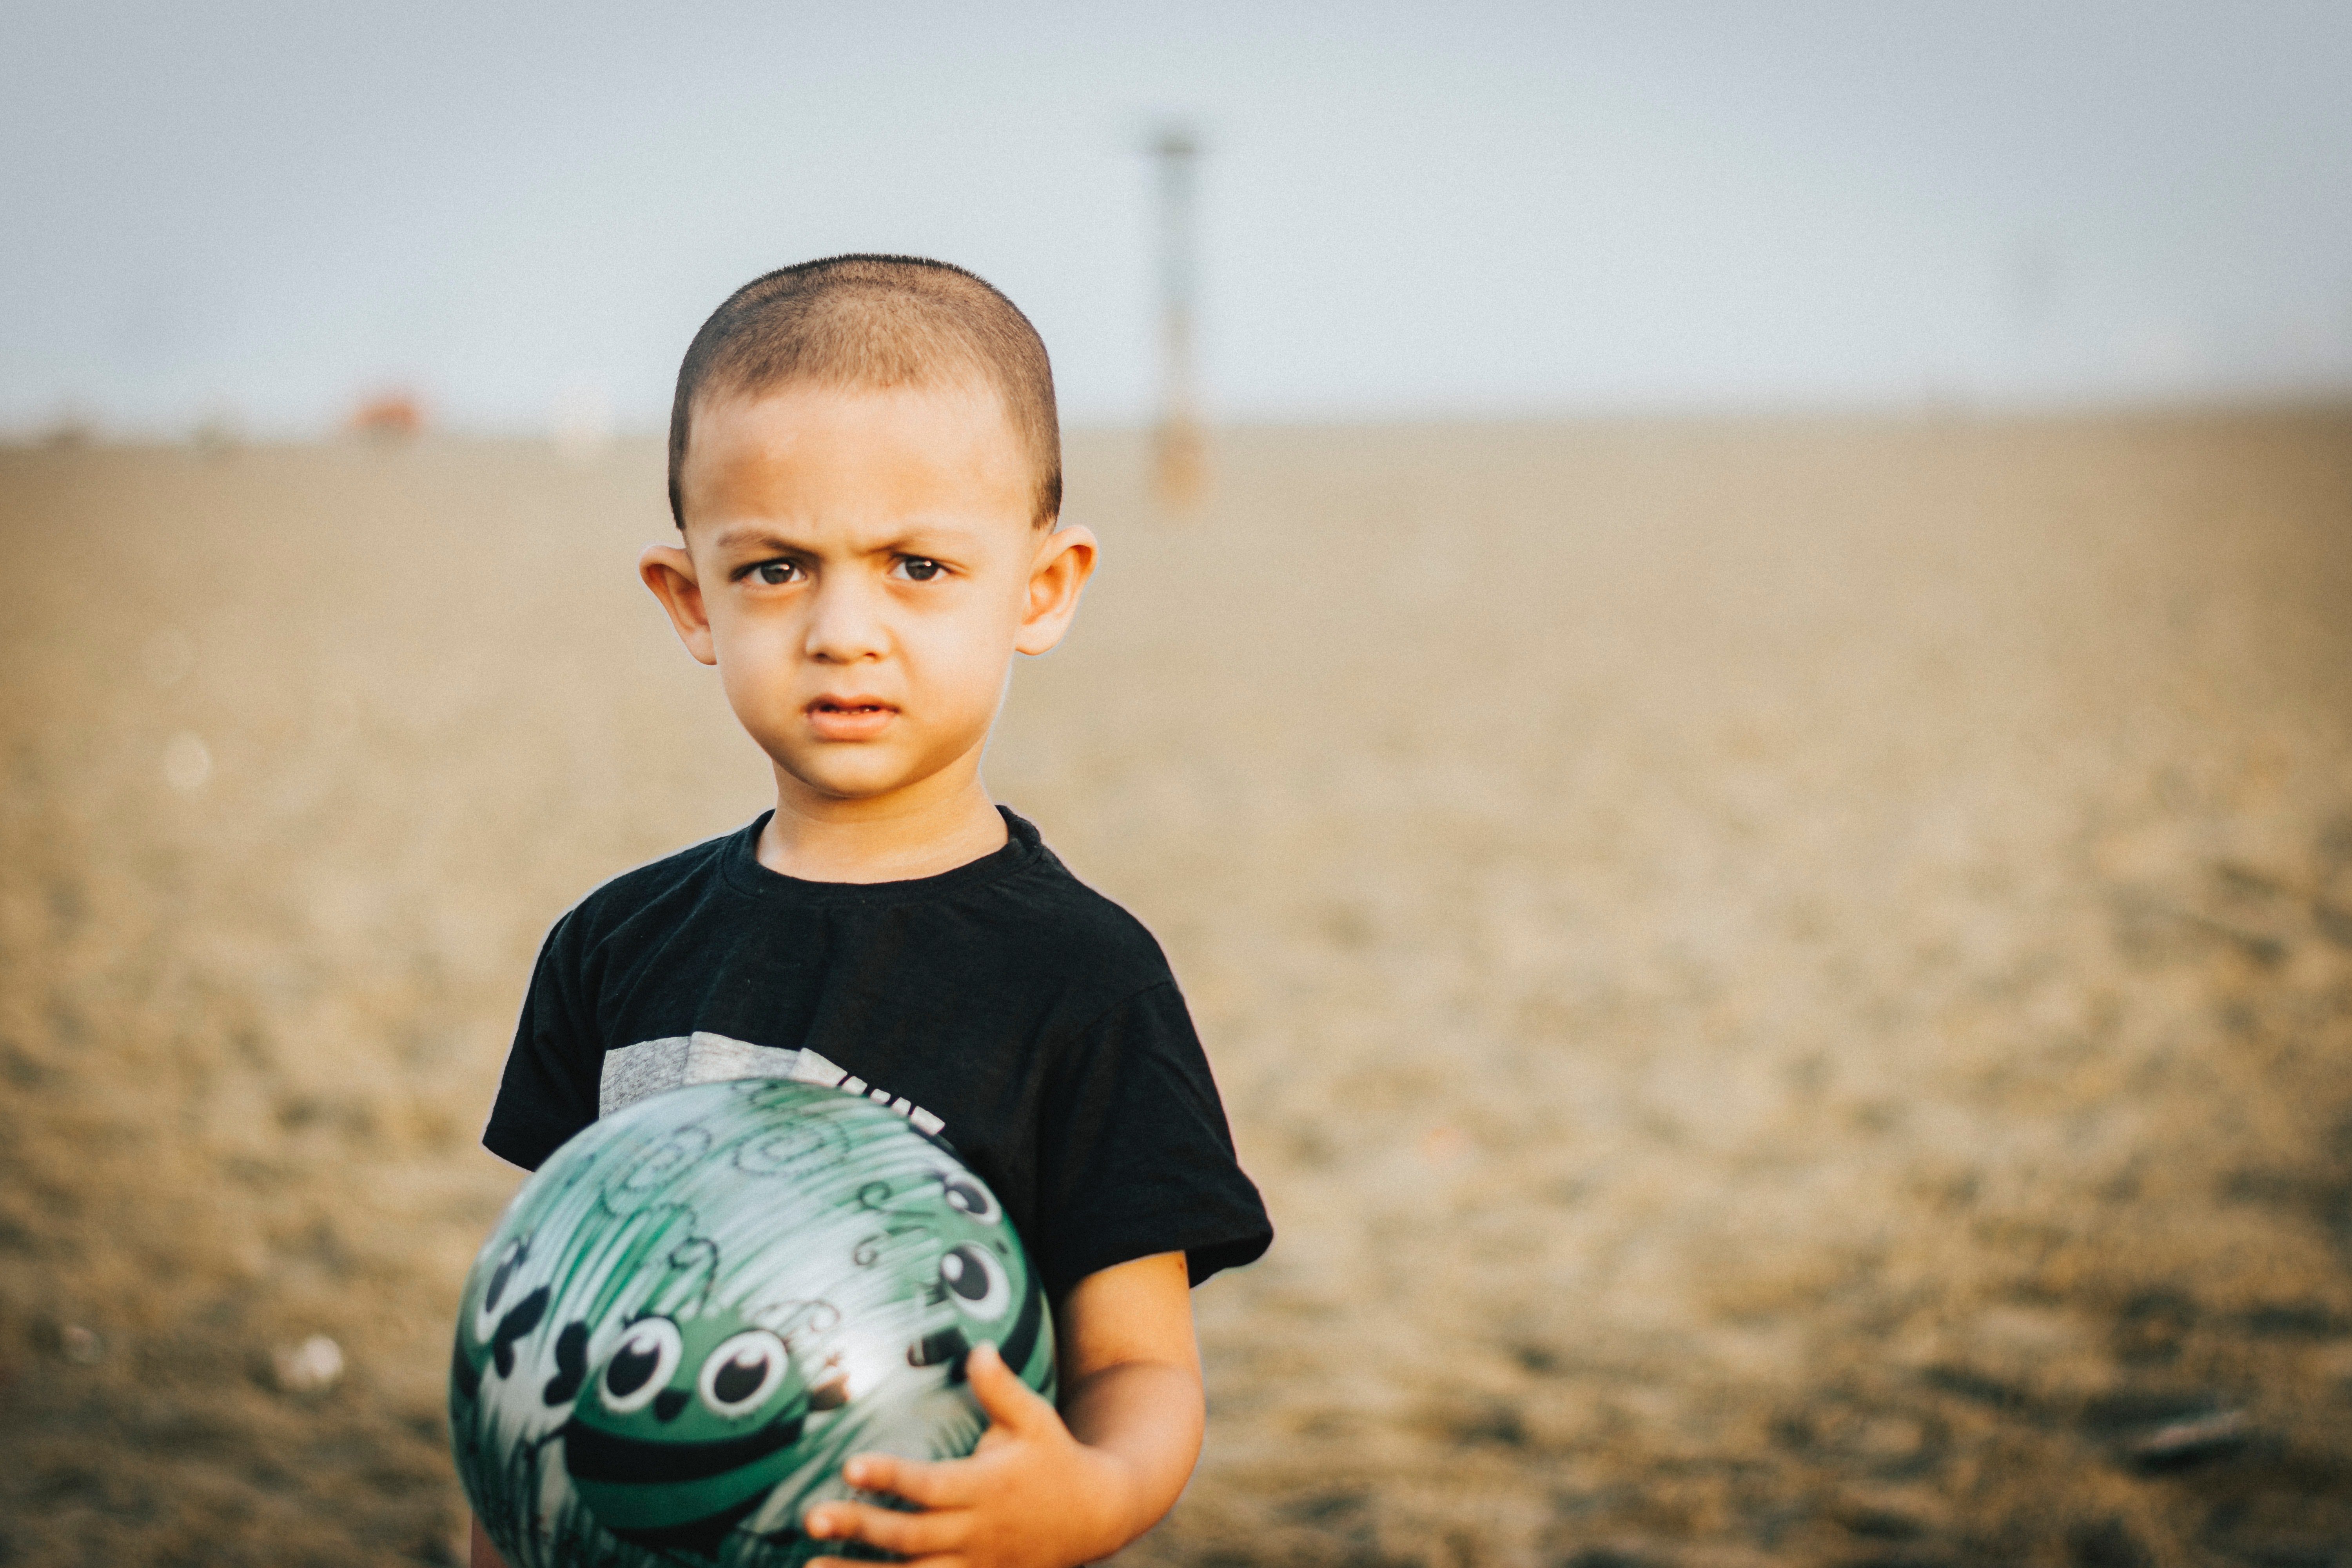 A little boy with a ball in his hand. | Source: Pexels